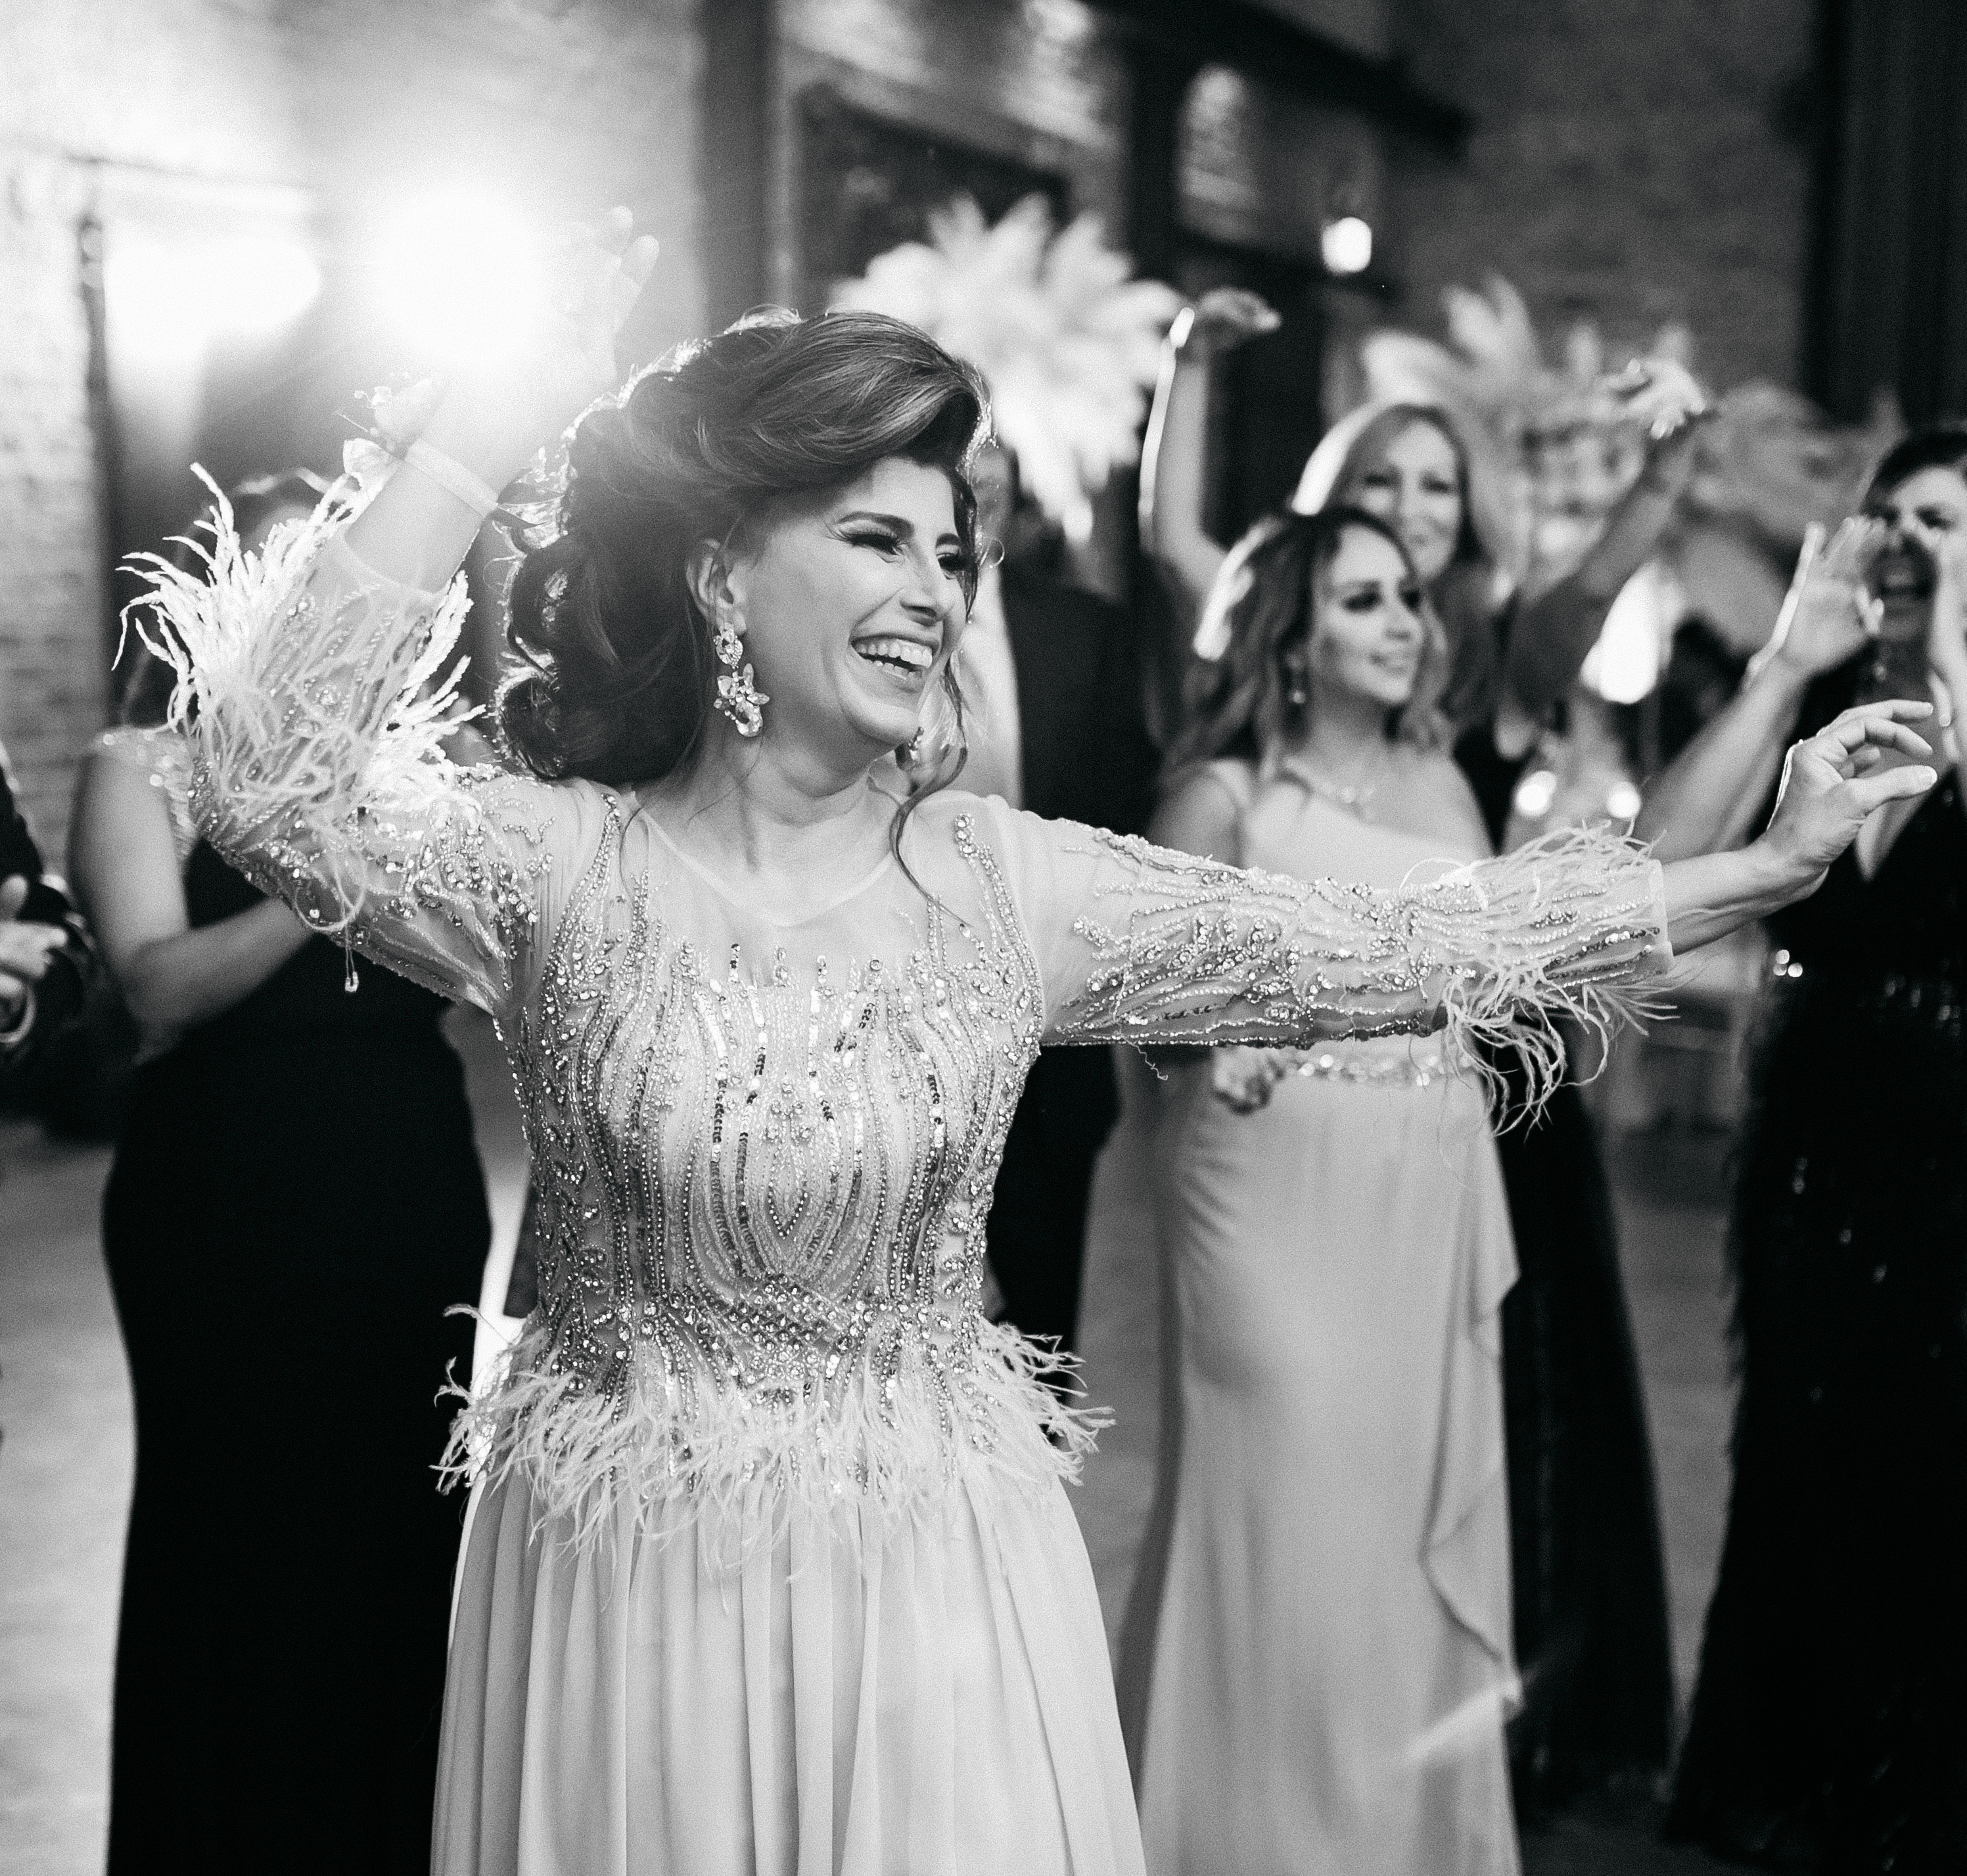 The bride's mother is smiling and dancing with the crowd during the pink and lilac Persian wedding.